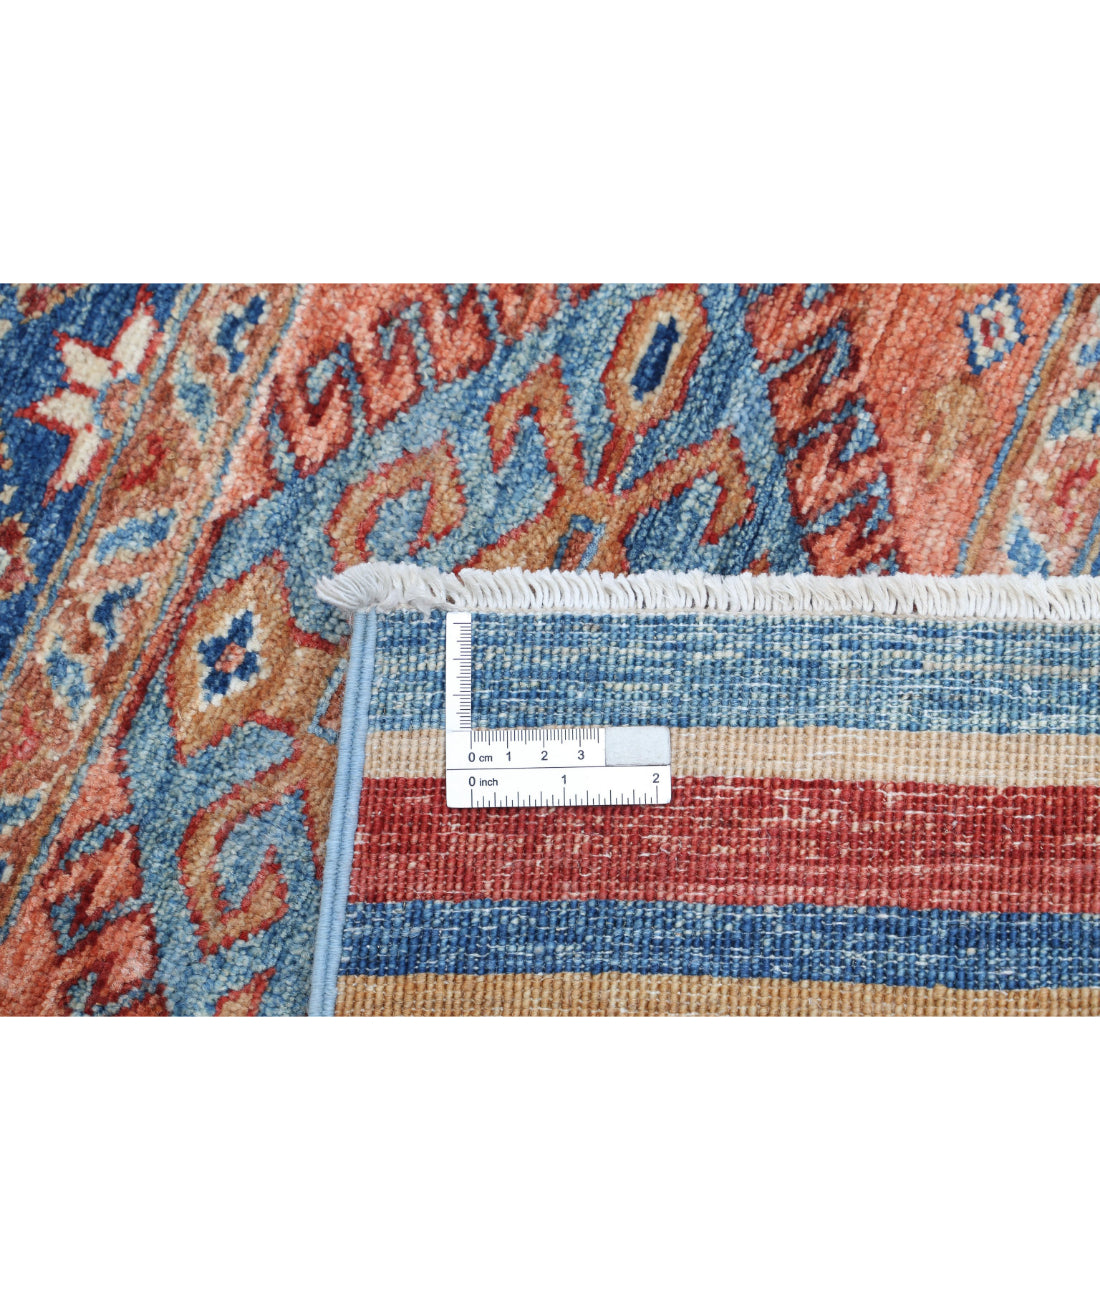 Hand Knotted Khurjeen Wool Rug - 2'9'' x 3'8'' 2'9'' x 3'8'' (83 X 110) / Multi / Multi